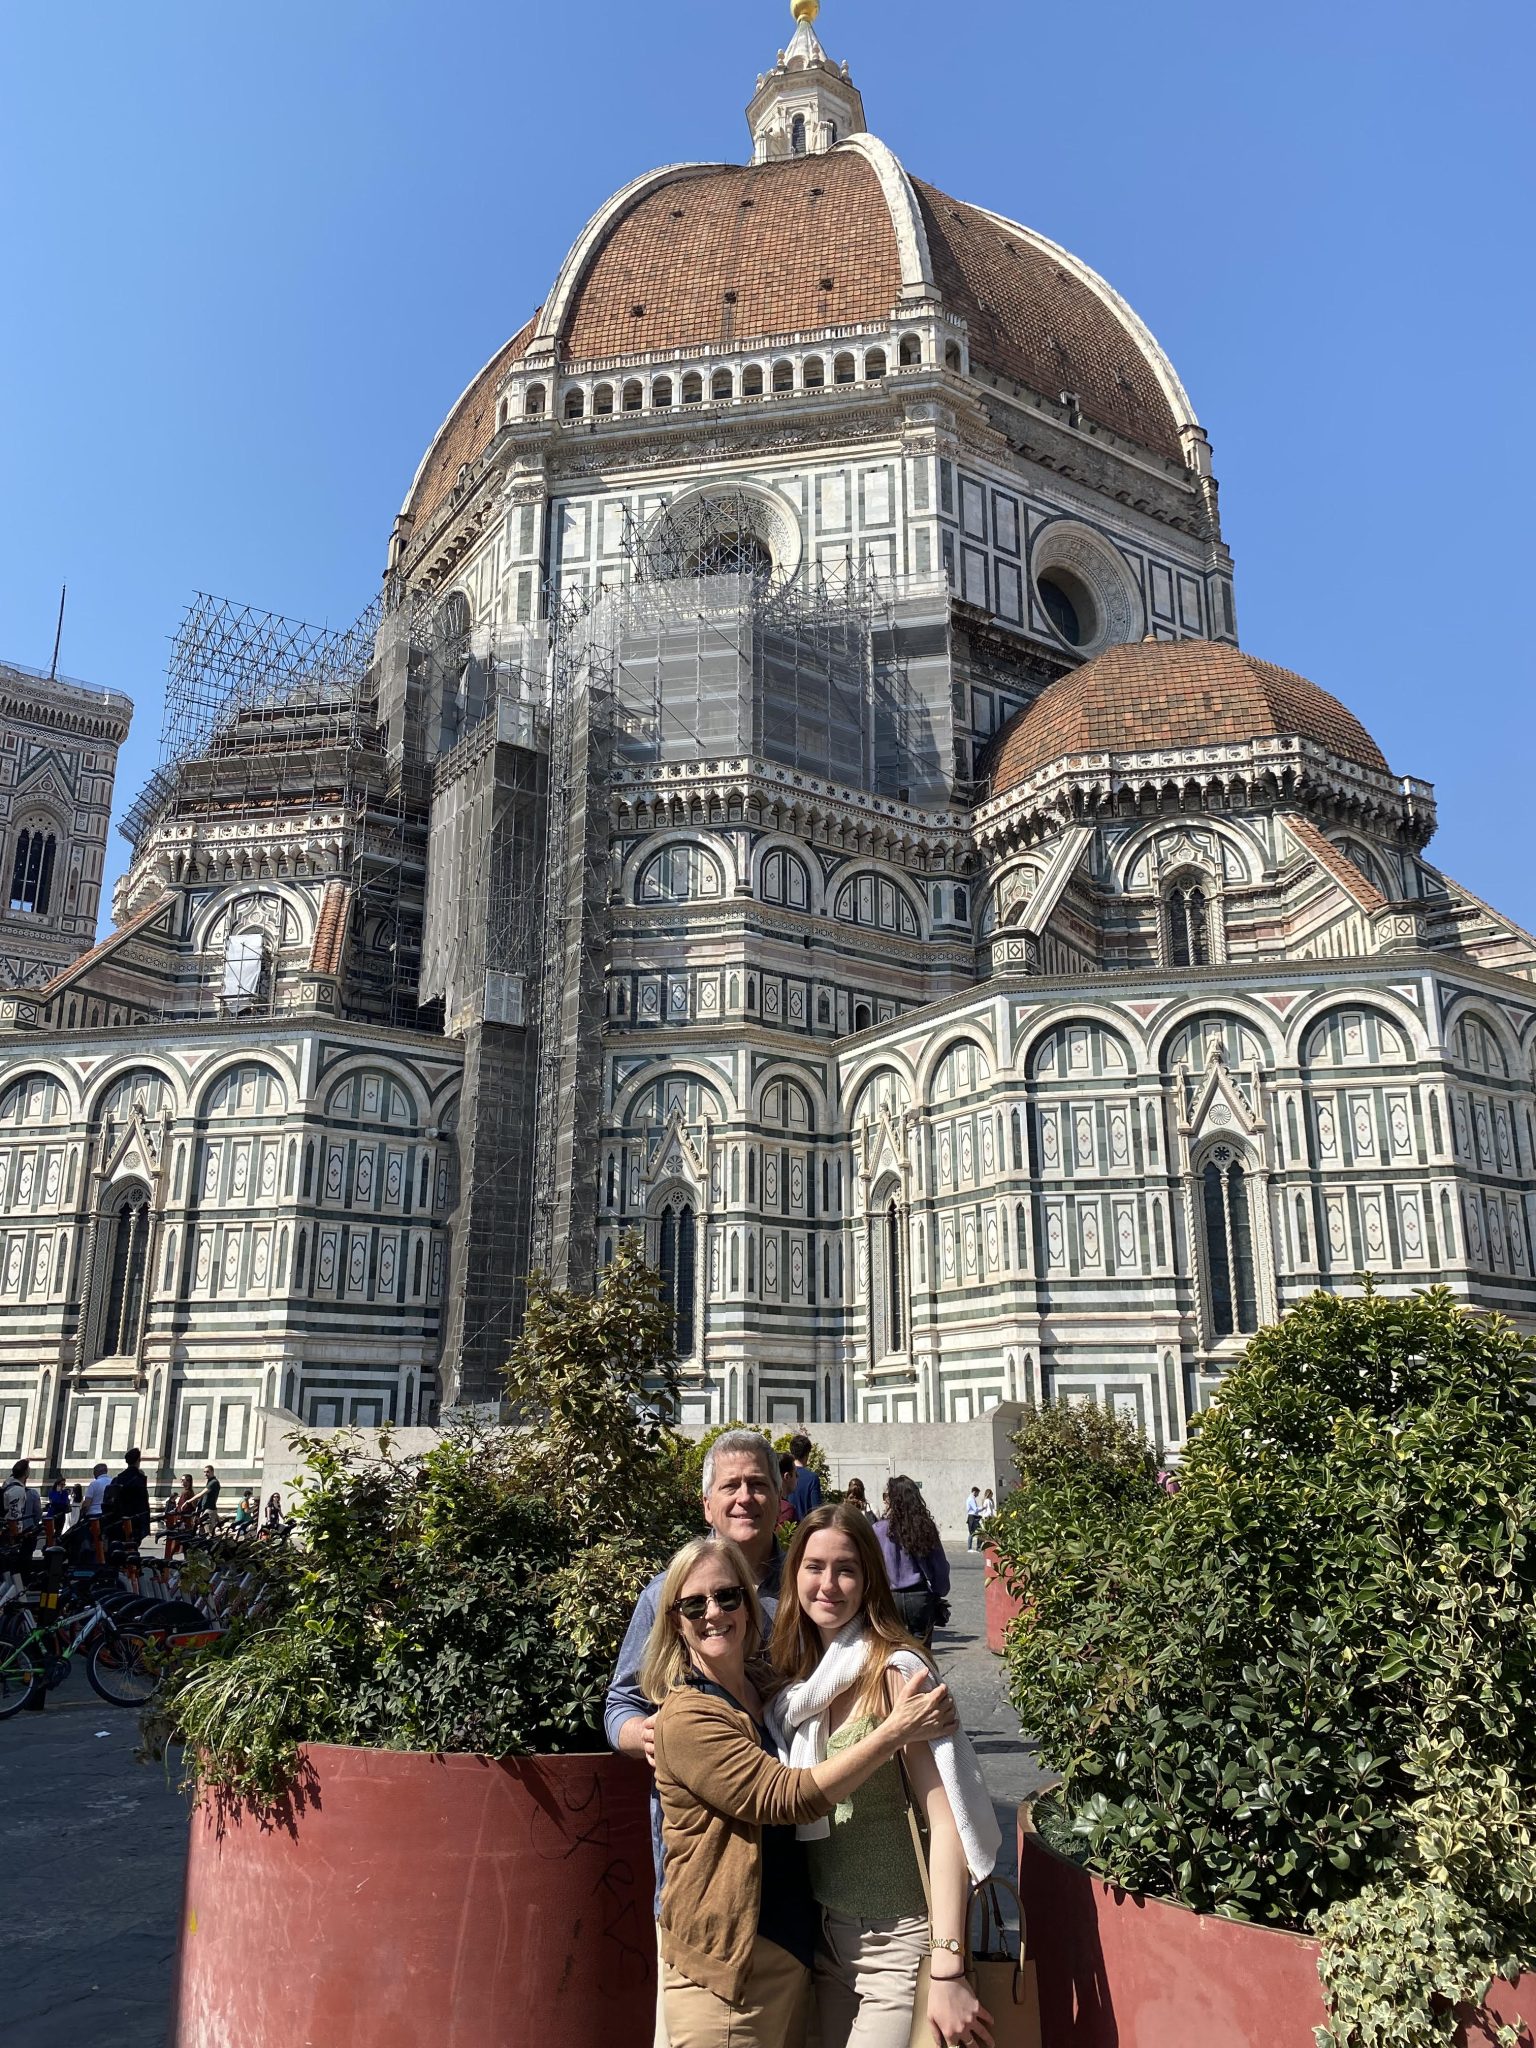 Family in front of the Duomo in Florence.